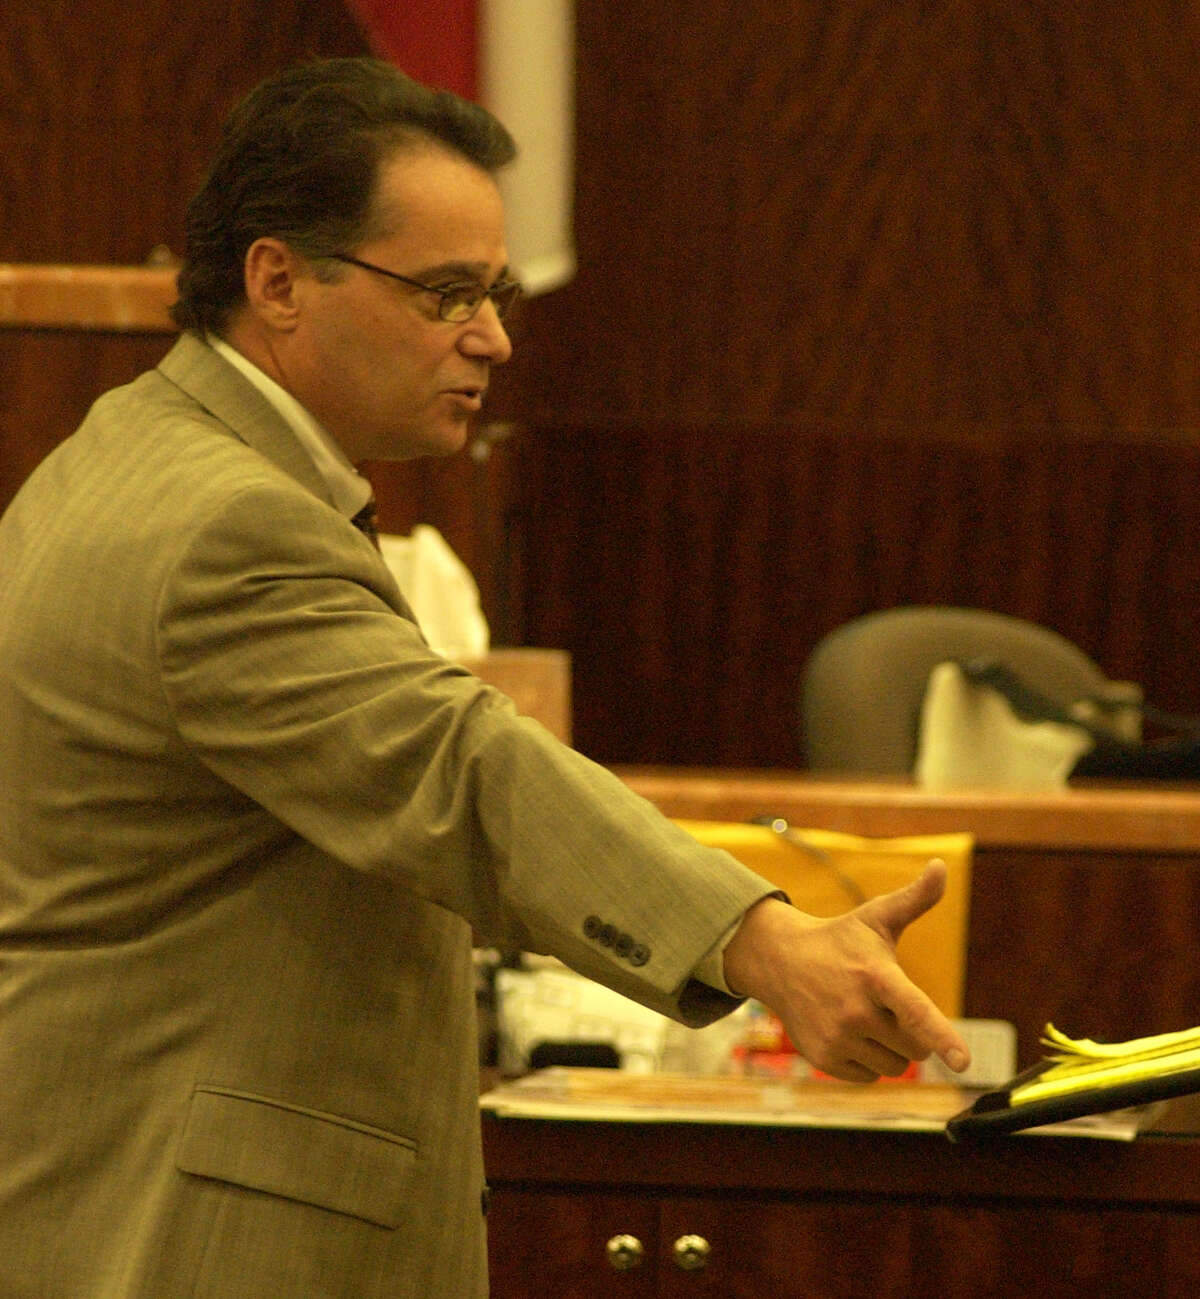 Cop KillingTrial: Harris County Prosecutor Dan Rizzo shows how defendant shot police officer in his closing arguments in the capital murder trial of Alfred Dewayne Brown, the man accused of killing Houston police officer Charles Clark during the robbery of a southeast side check-cashing store in 2003. Photo by Carlos Antonio Rios Houston Chronicle